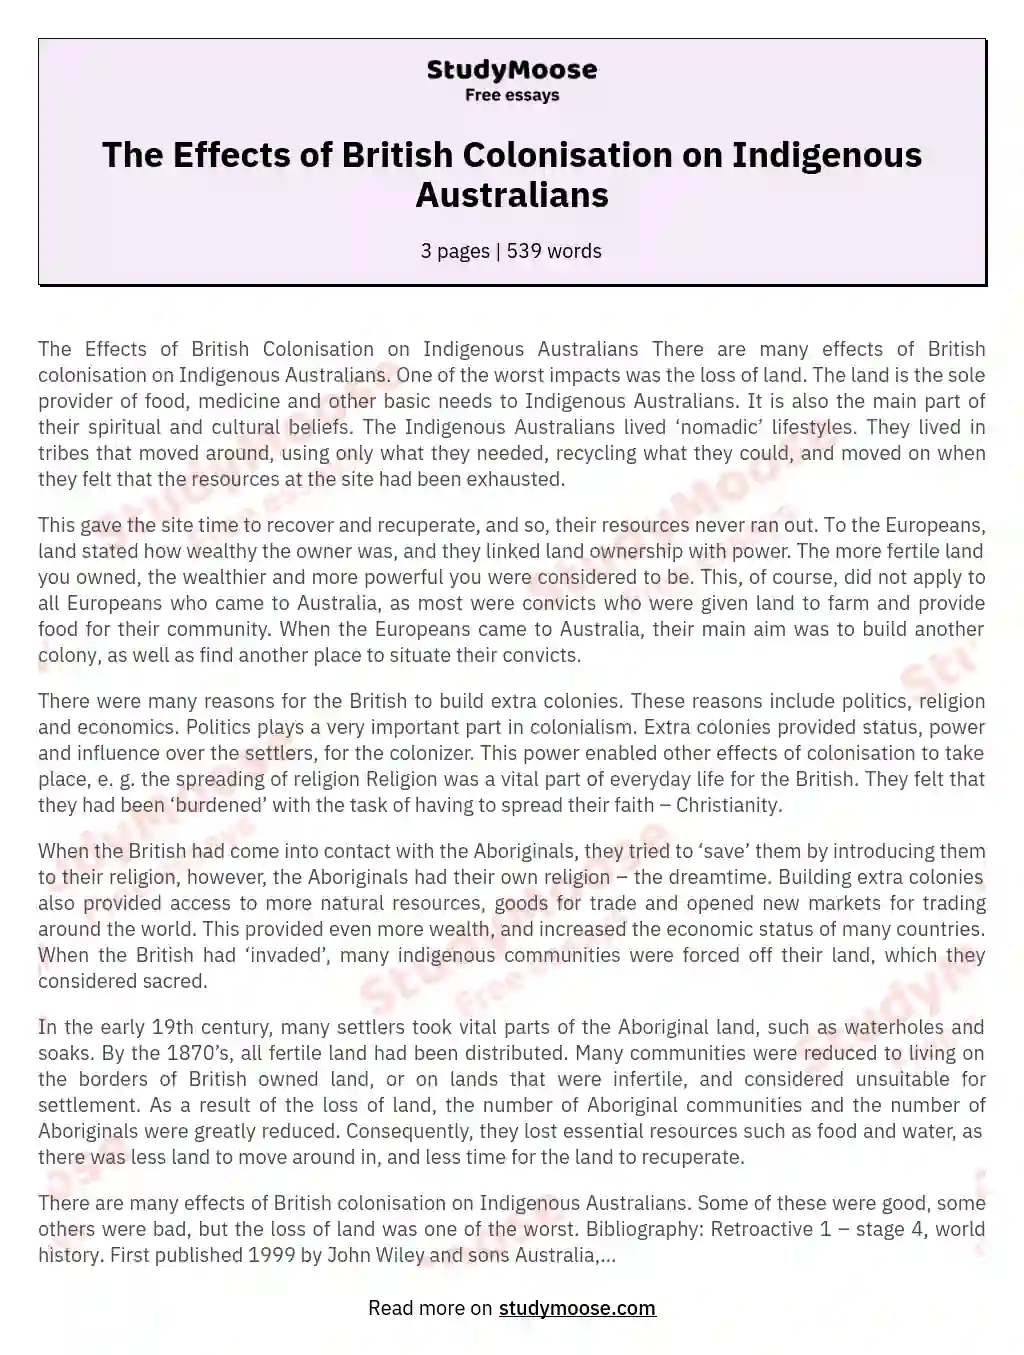 The Effects of British Colonisation on Indigenous Australians essay